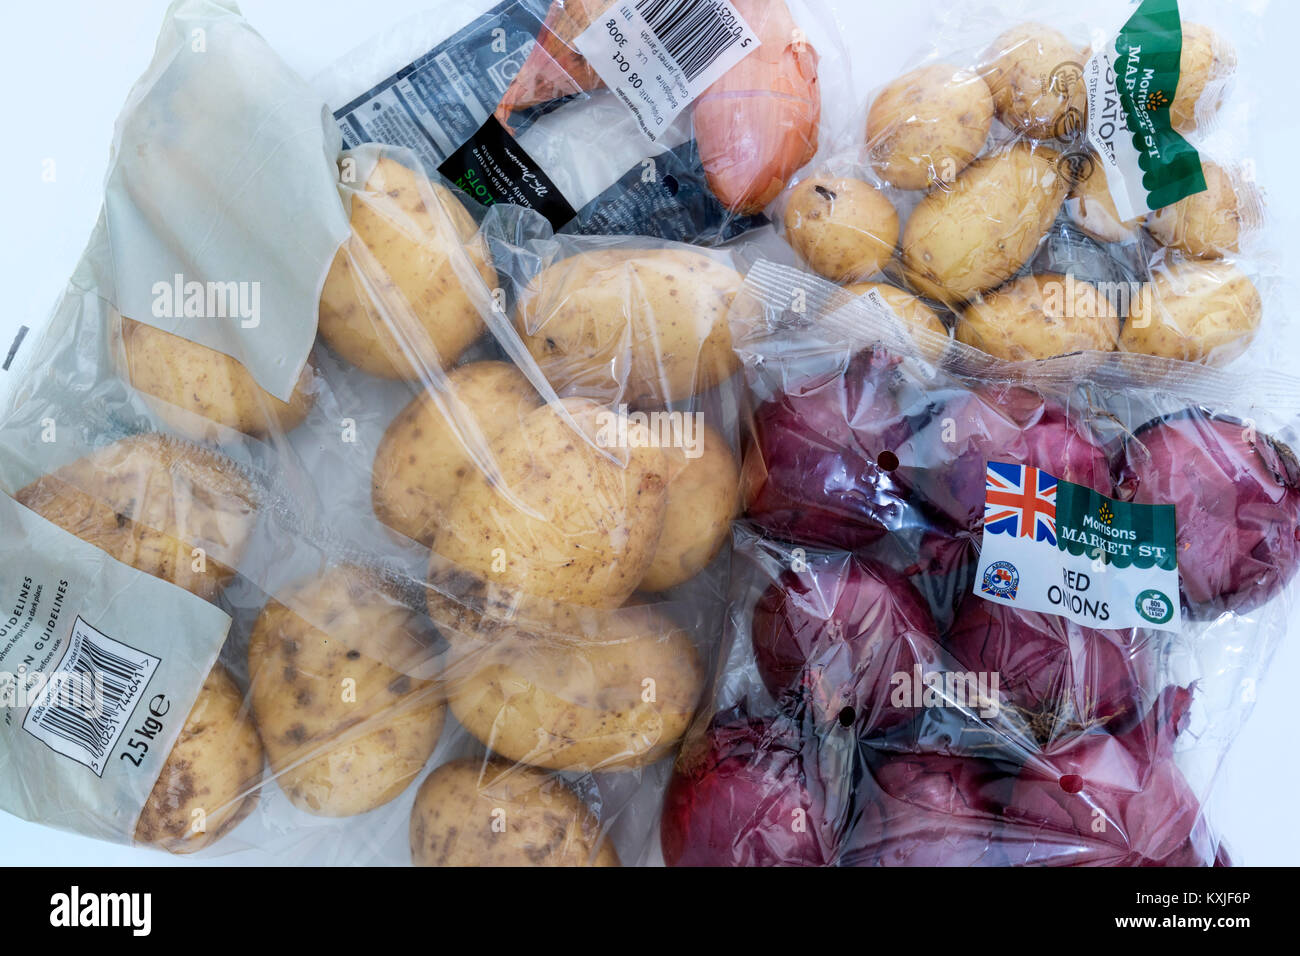 Examples of Vegetables Wrapped in Plastic, UK Stock Photo